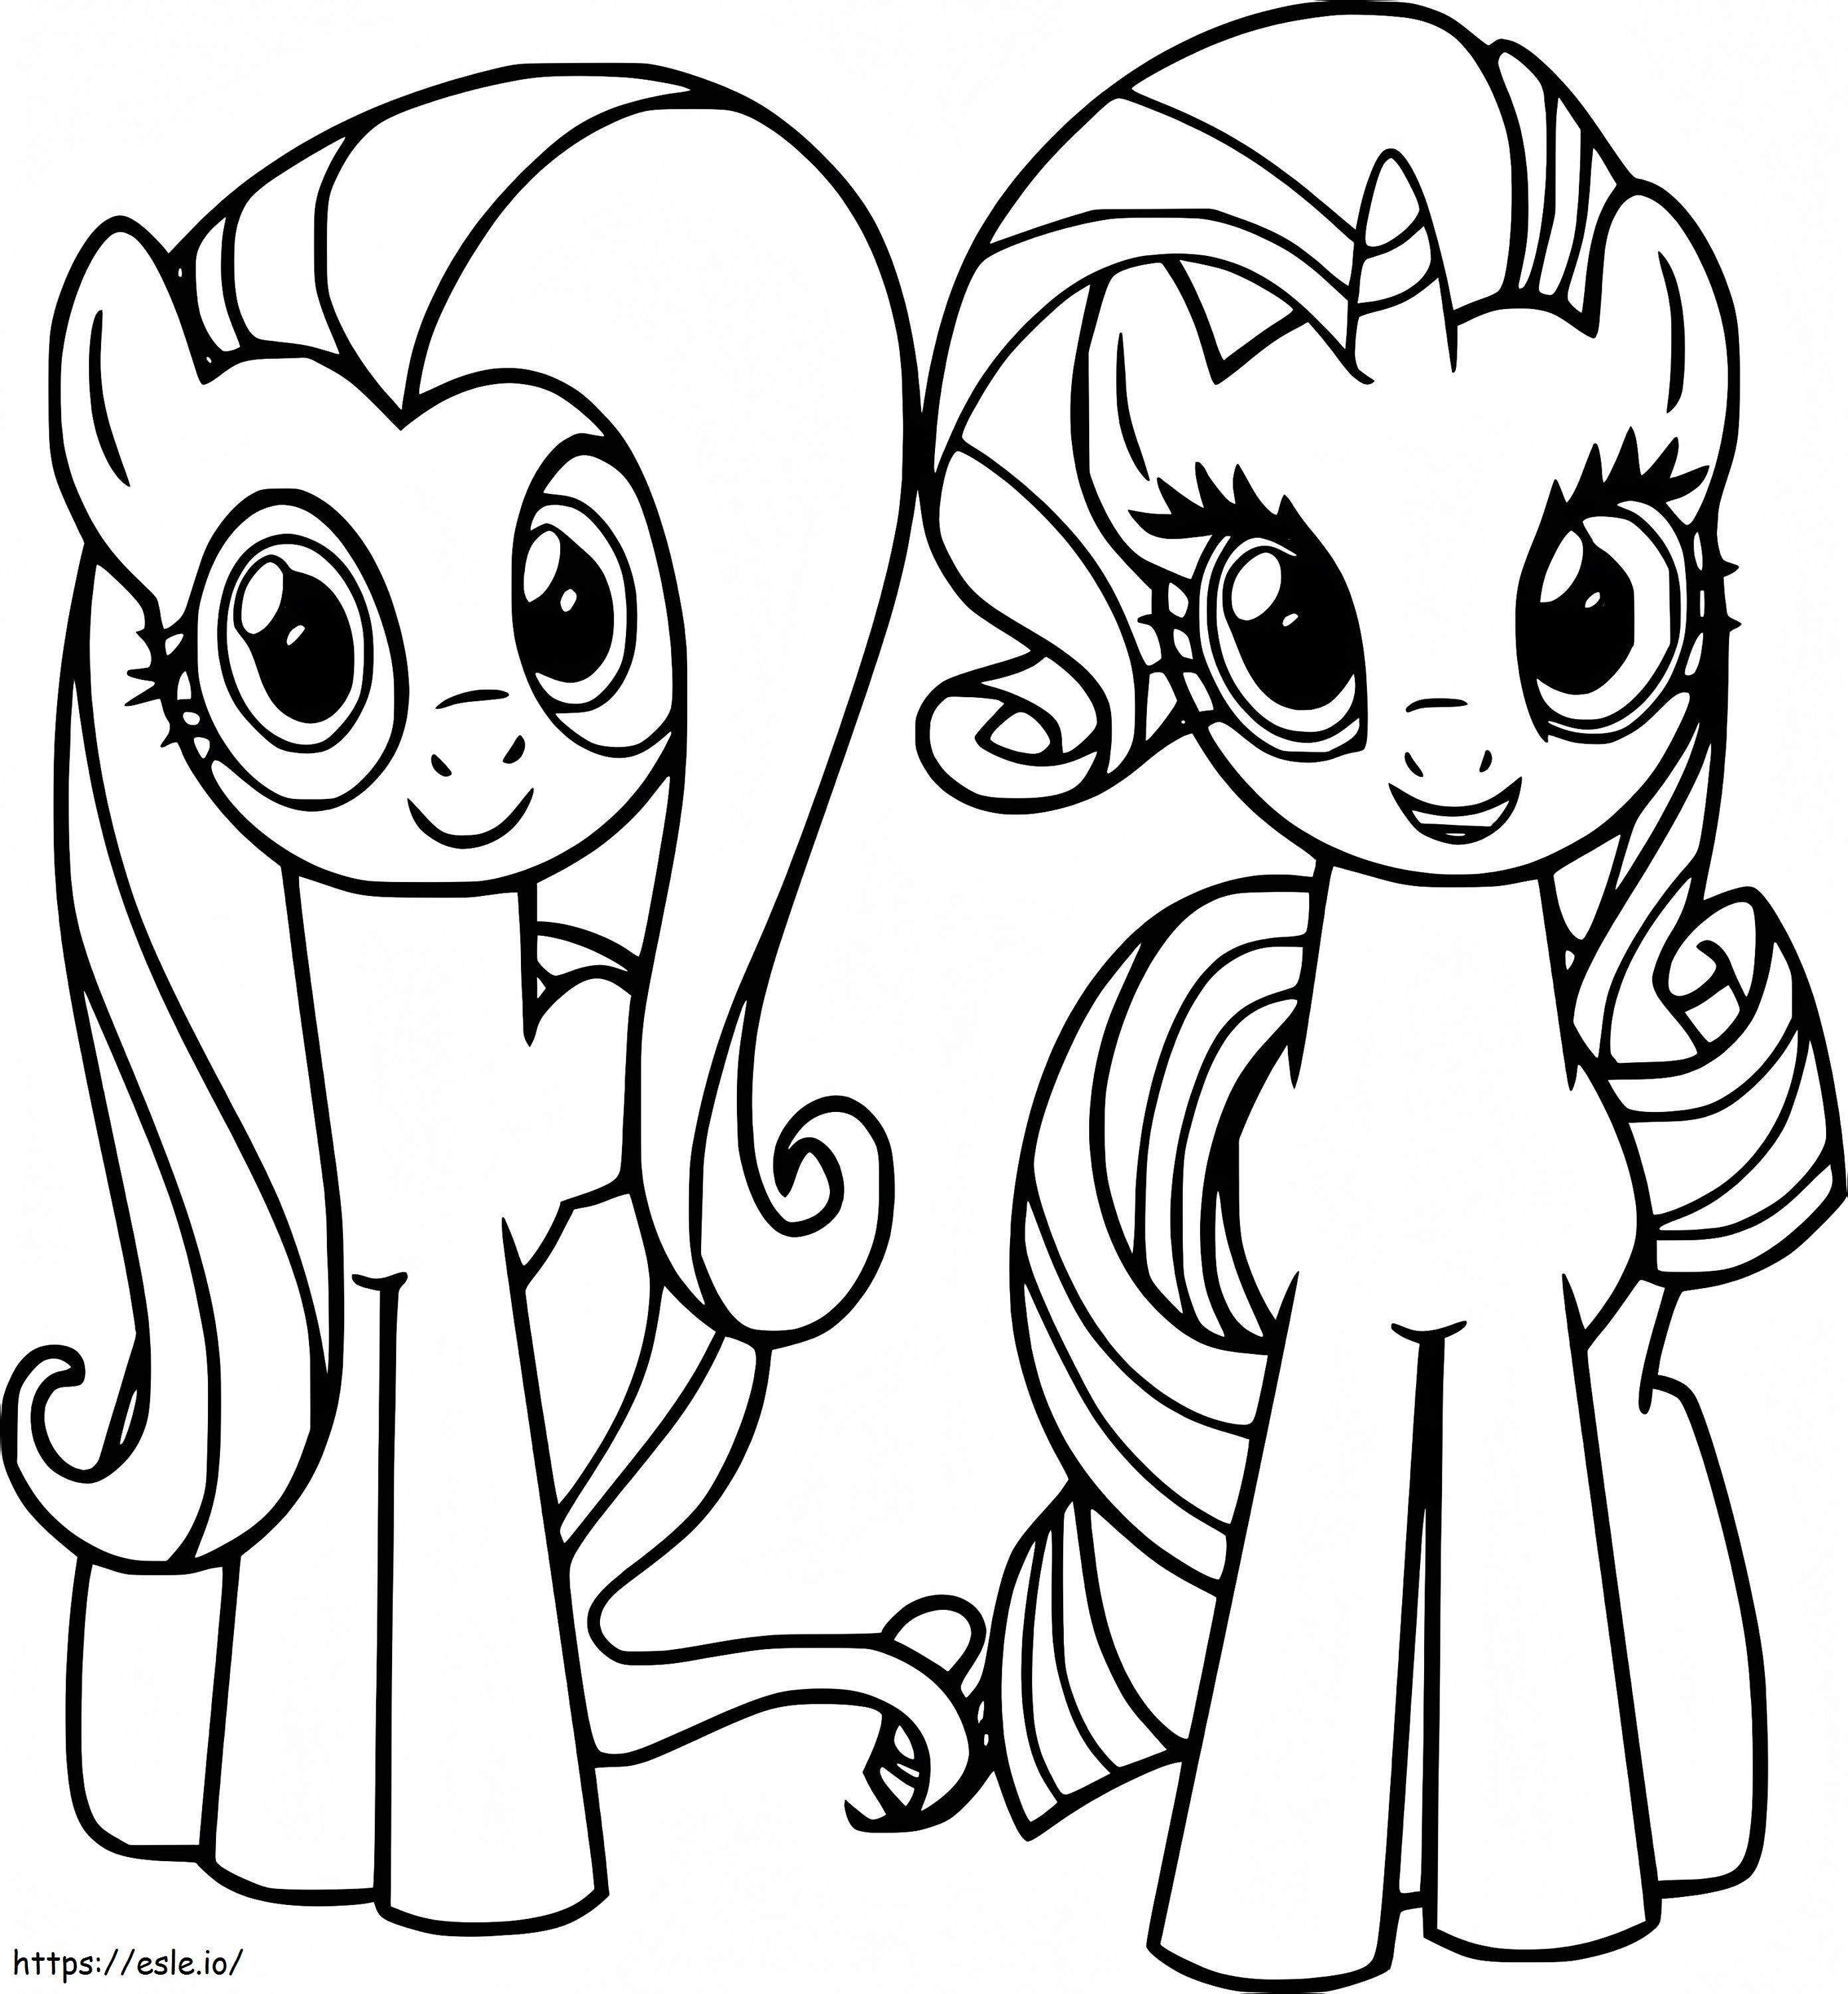 Fluttershy And Rarity coloring page